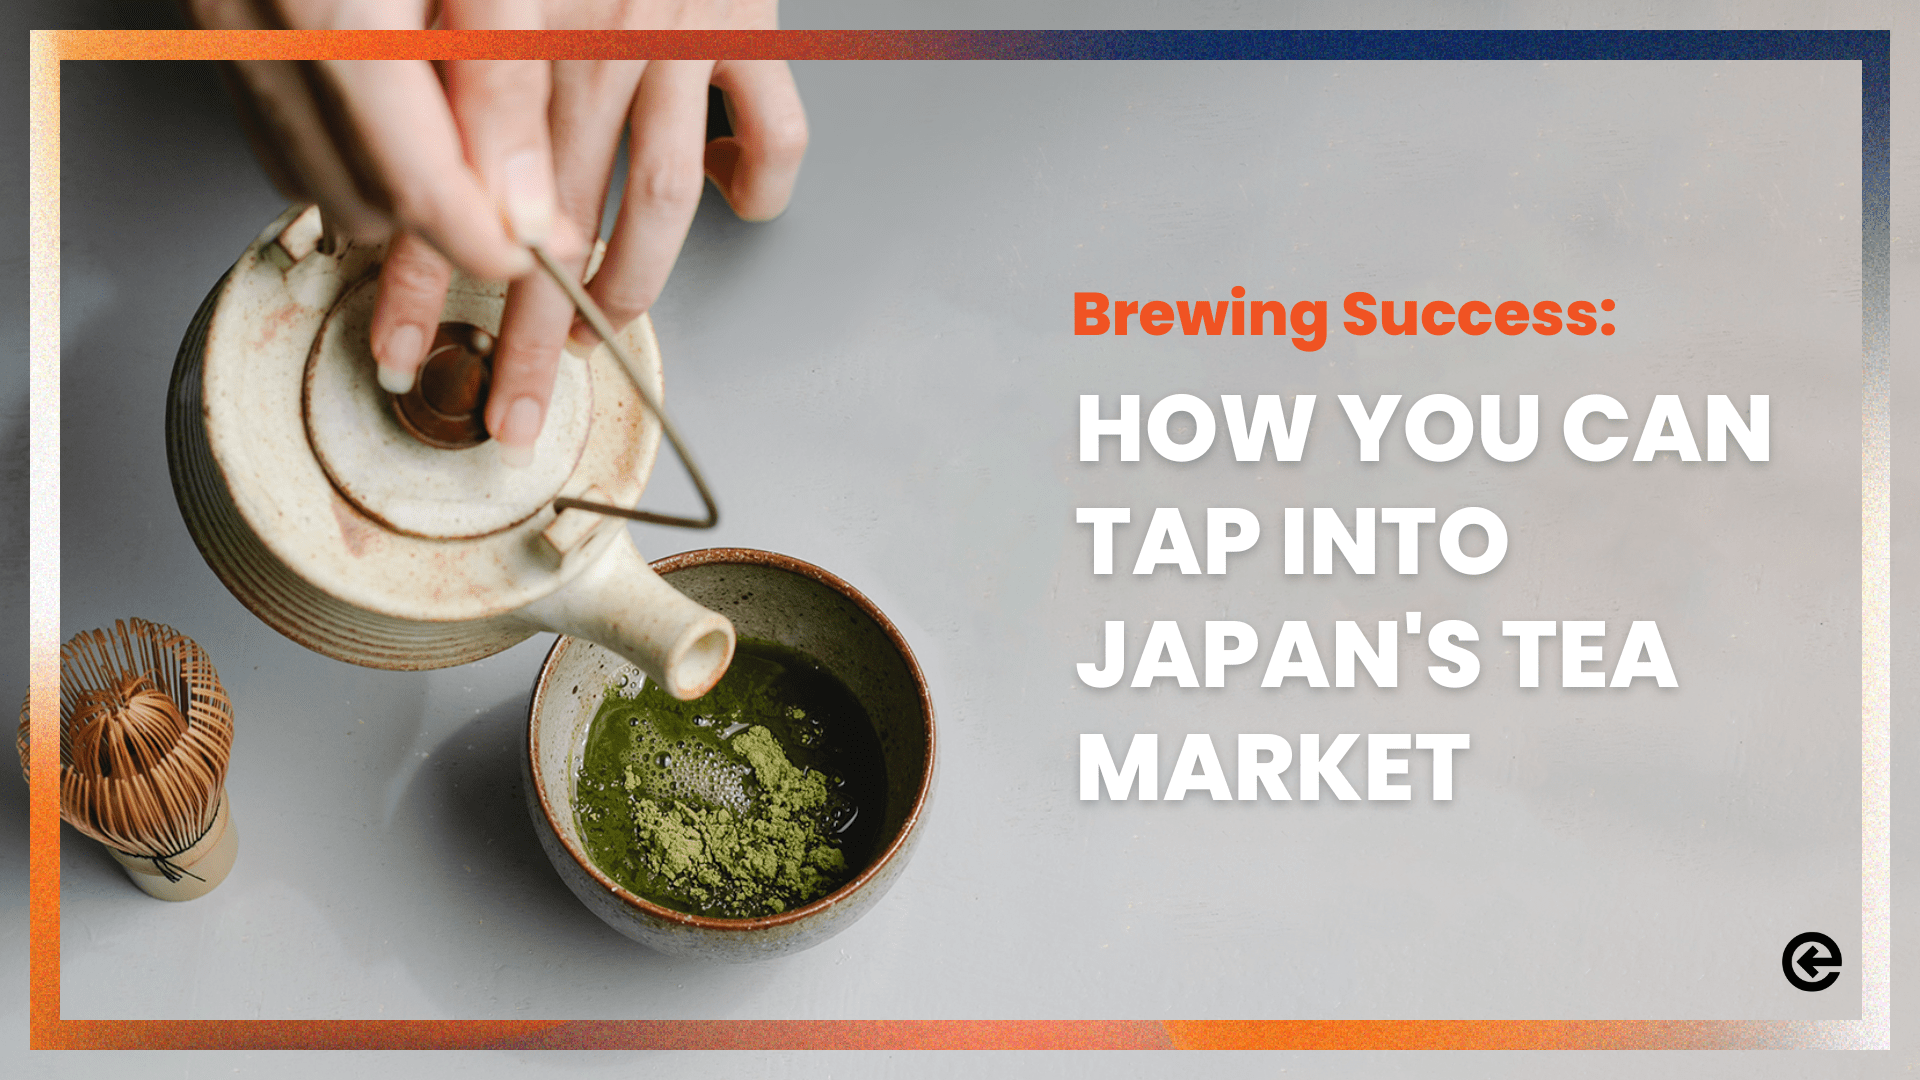 Brewing Success: How You Can Tap into Japan’s Tea Market